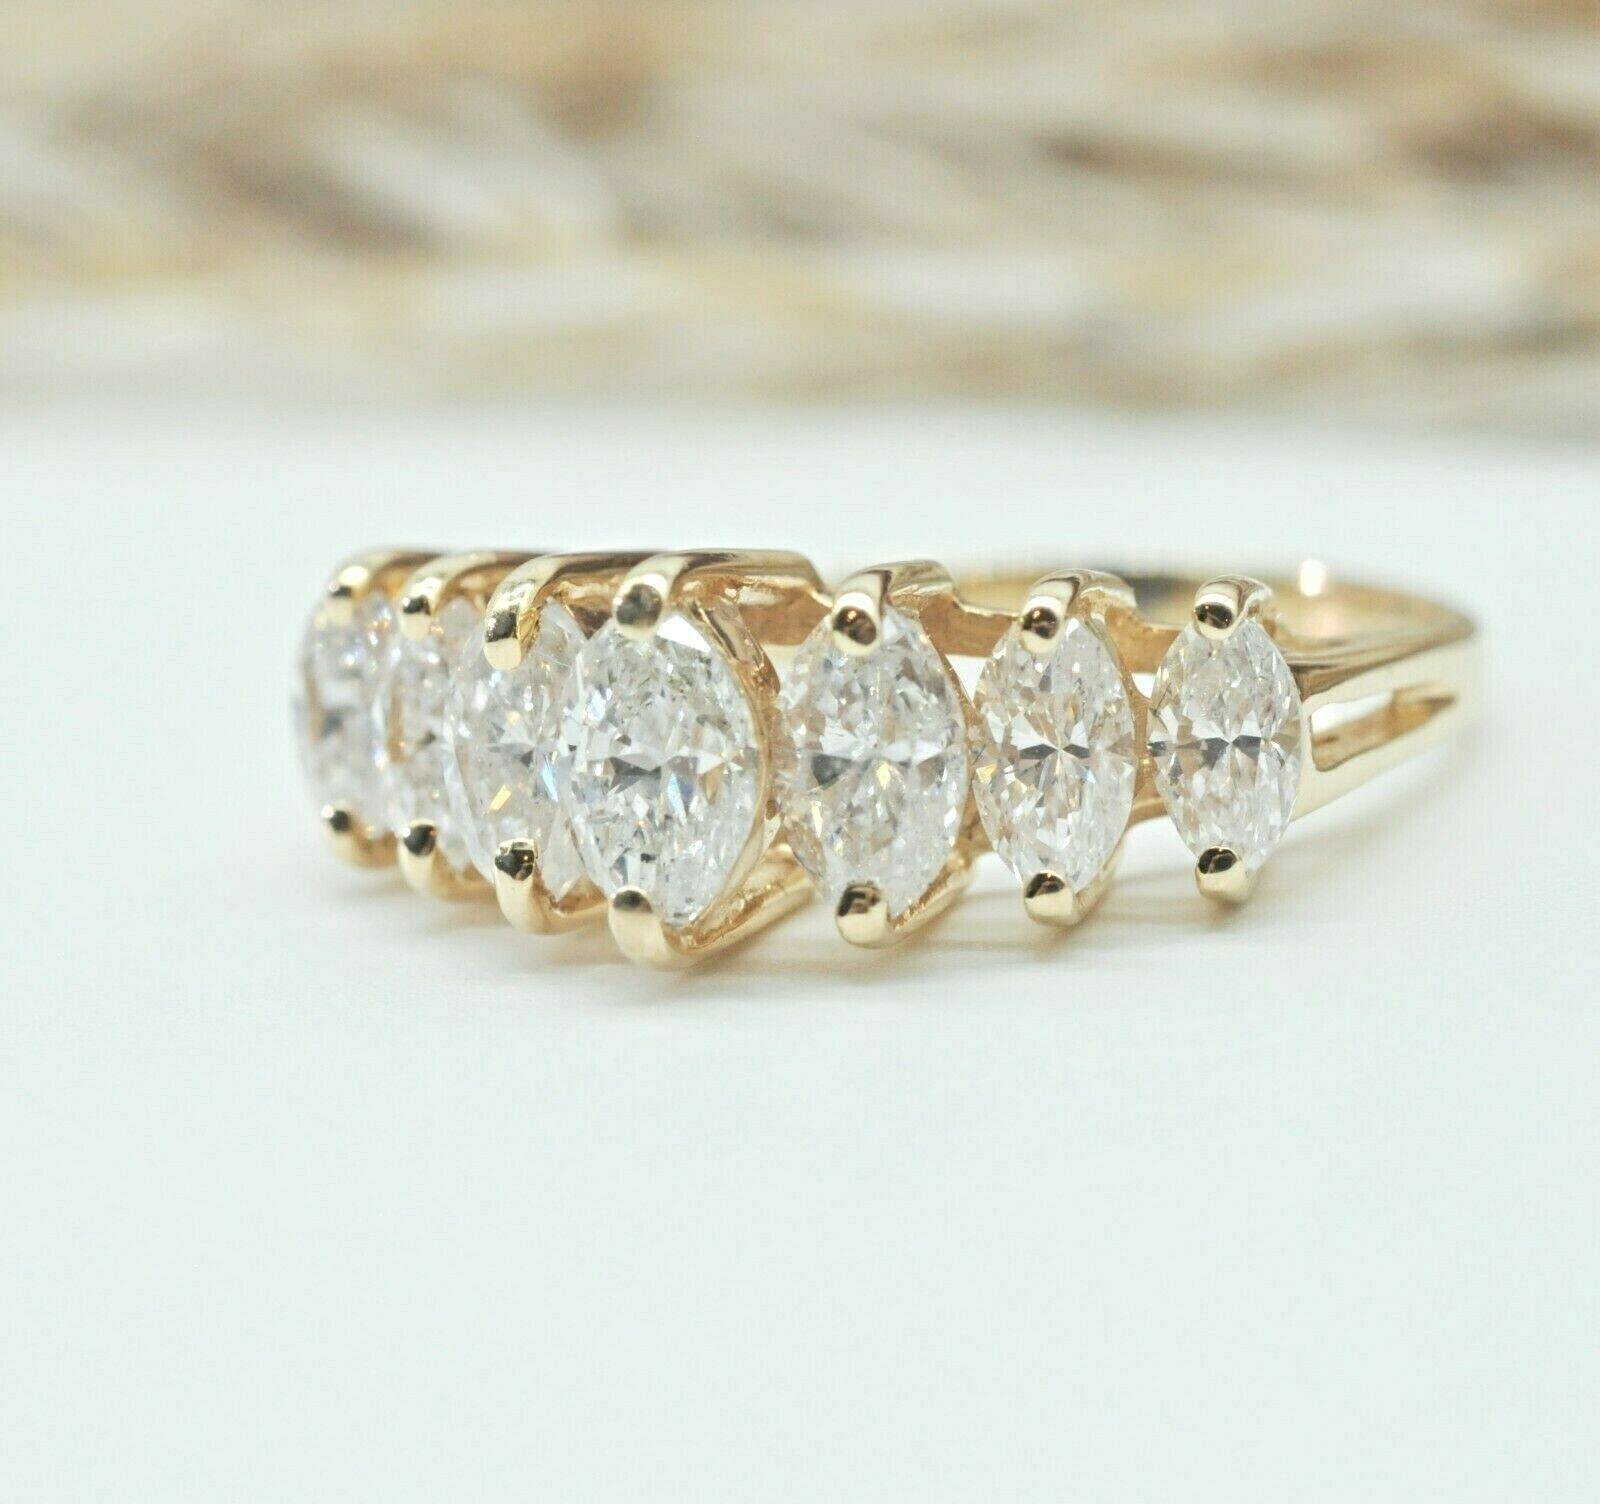 2.00 CARAT MARQUISE DIAMONDS BAND RING IN 
14K YELLOW GOLD 6.75US
Specifications:
    main stone: MARQUISE DIAMOND
    DIAMONDS: 7 PCS
    carat total weight: 2.00 CARAT TOTAL WEIGHT
    color: F
    clarity: SI1
    brand: NONE
    metal: 14K